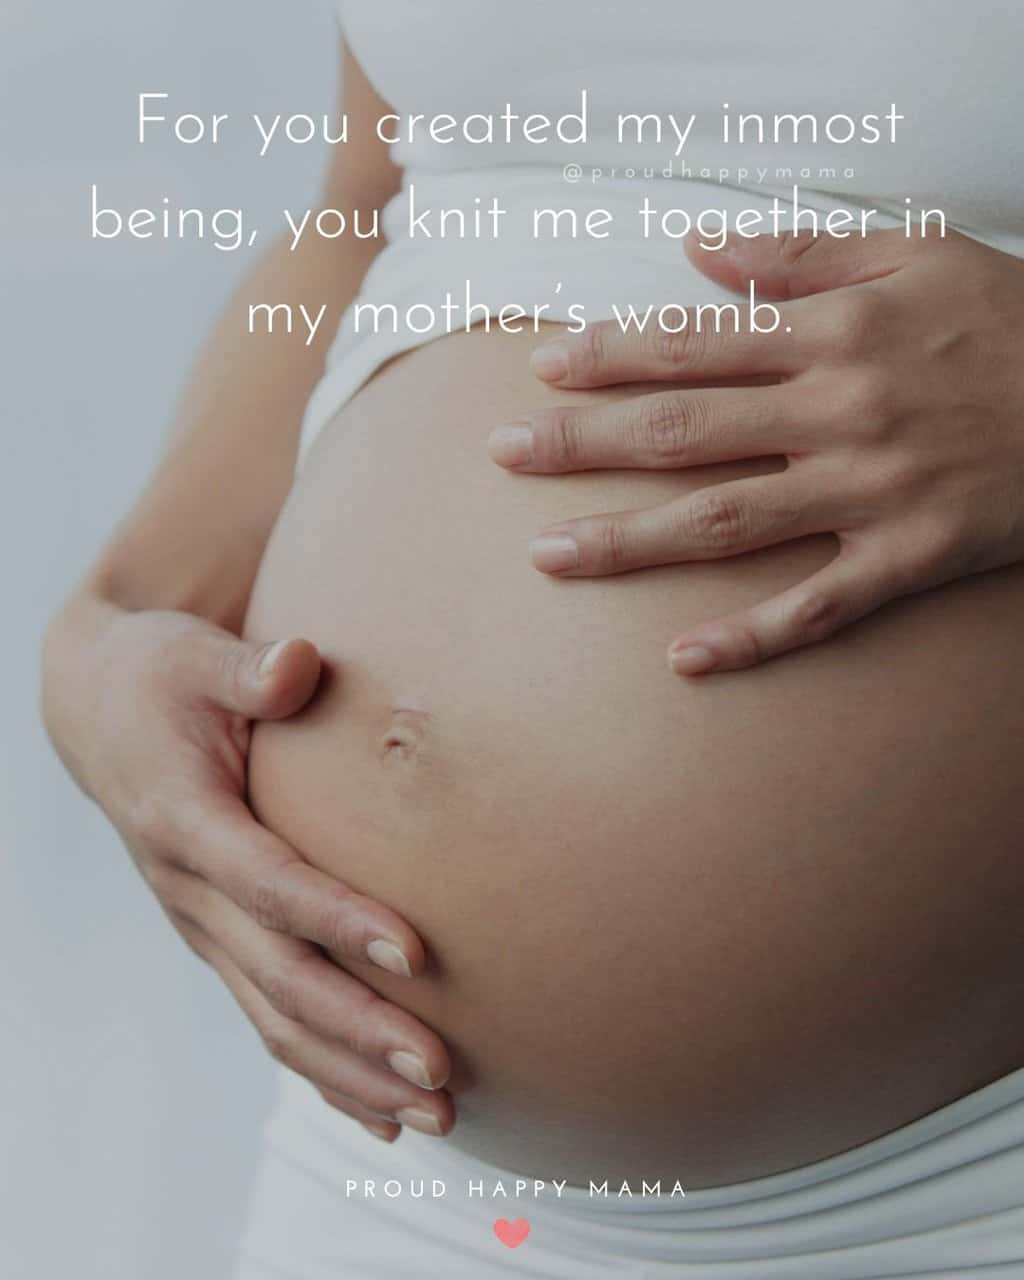 9 Months Pregnant Quotes | For you created my inmost being, you knit me together in my mother’s womb.